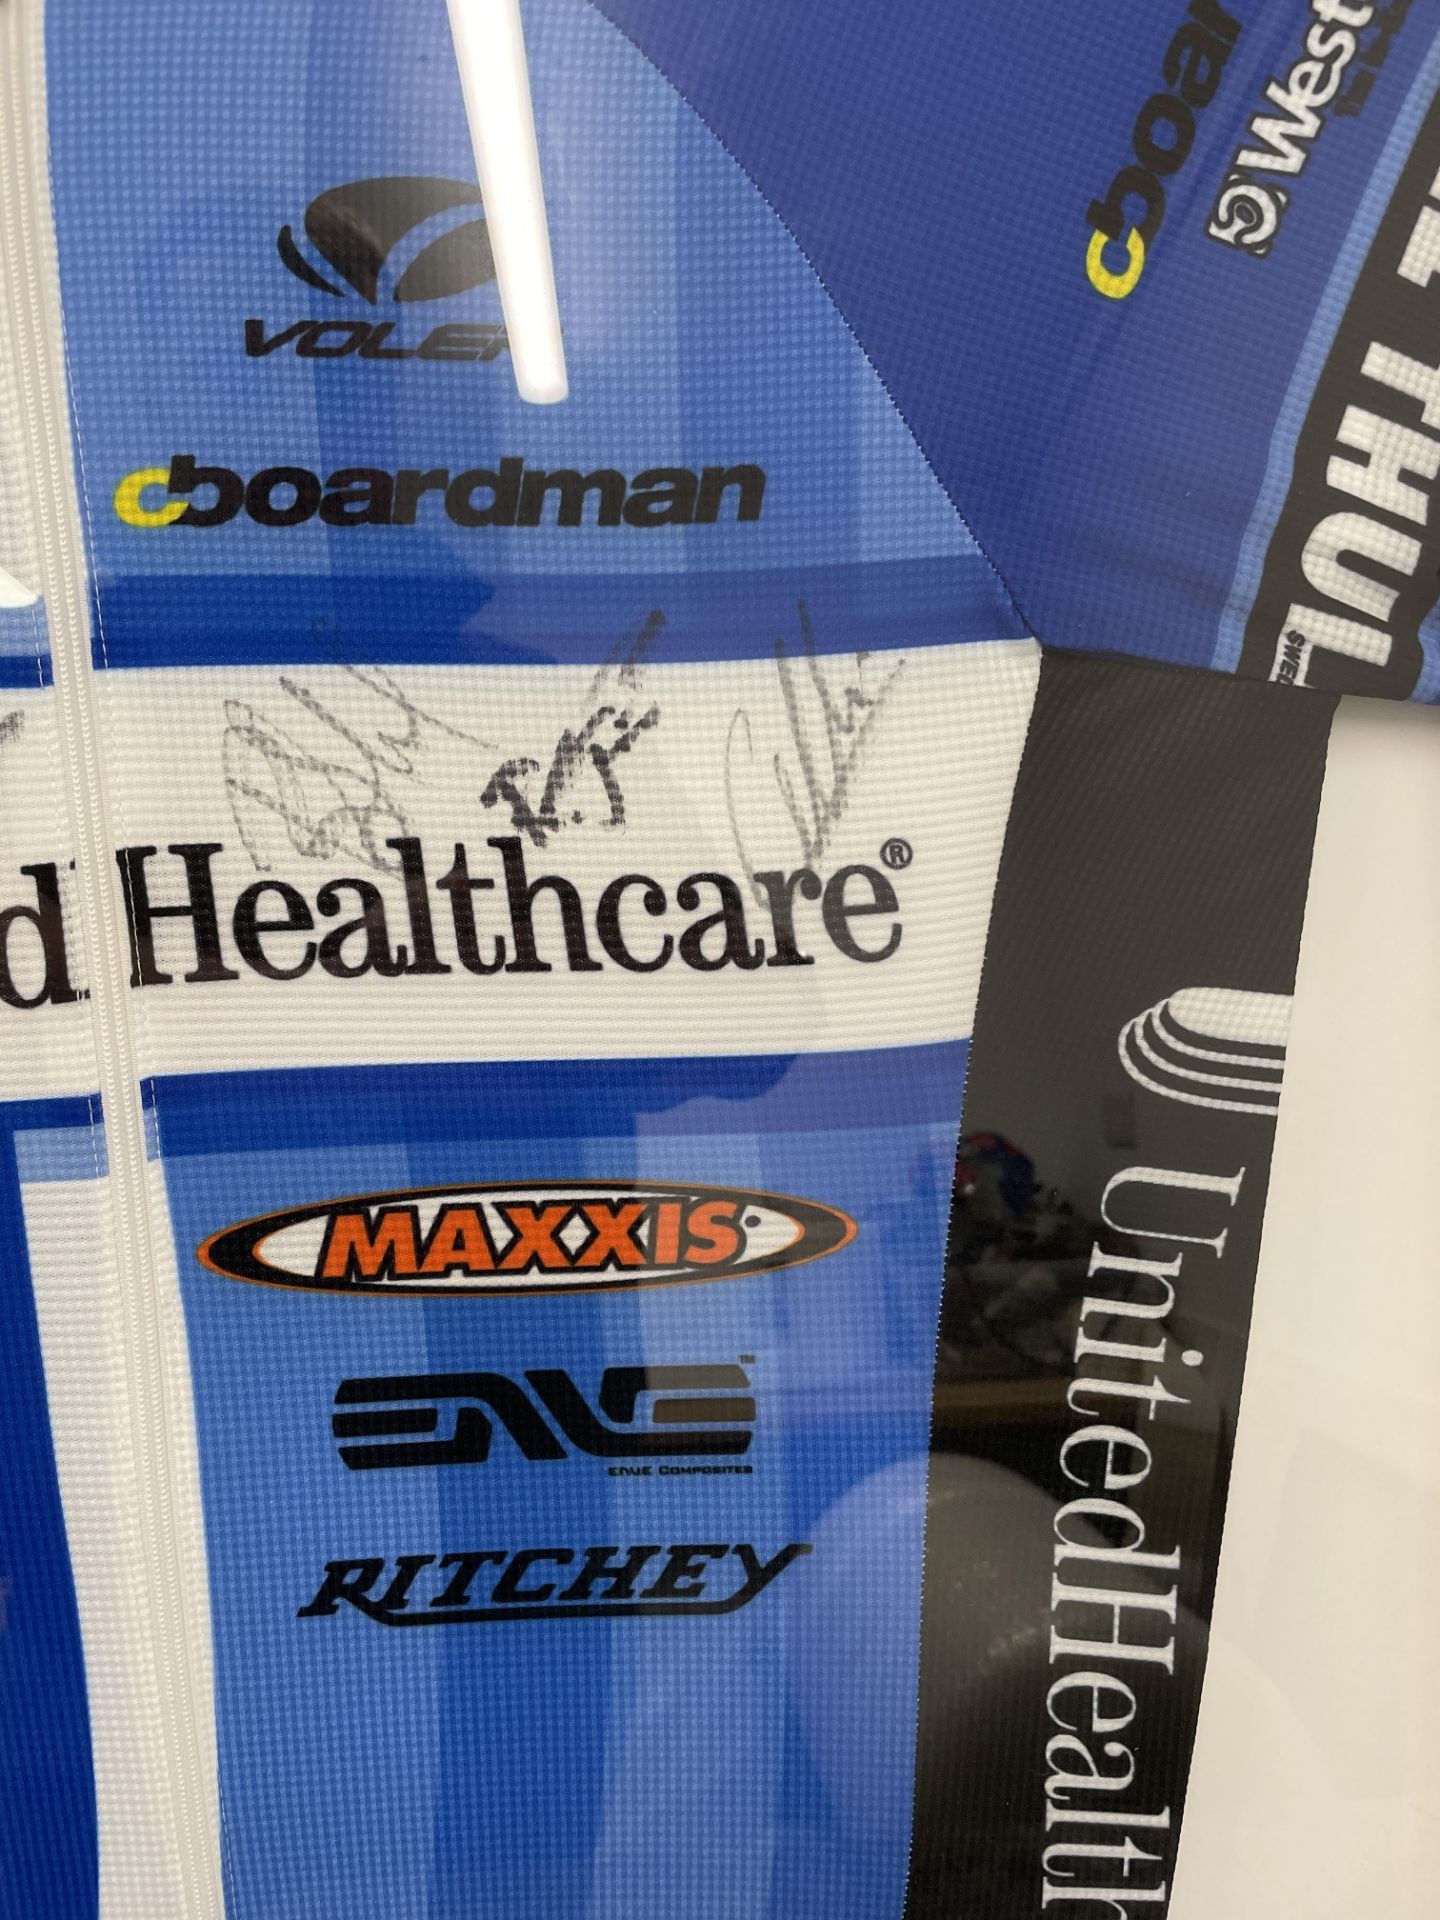 United Health Care - Maxxis Framed & Signed Pro Cycling Team Jersey with Multiple Signatures (Circa - Image 3 of 3